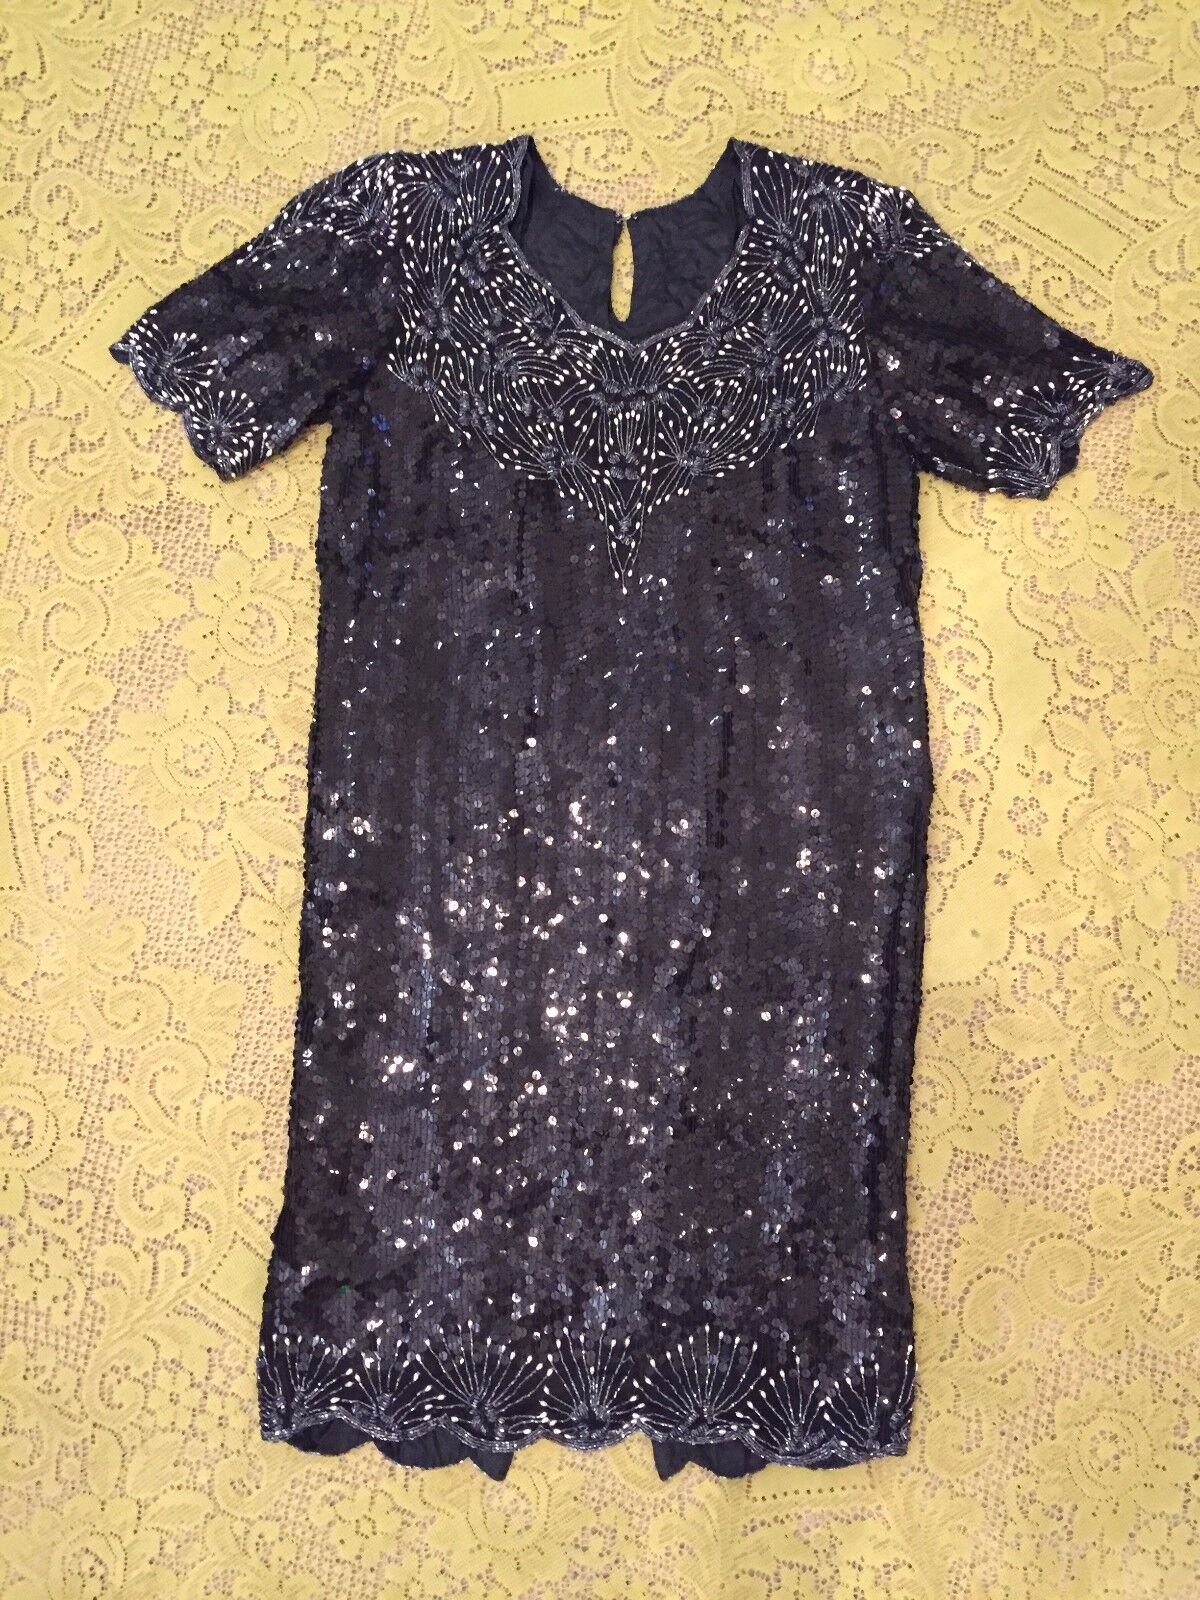 Vintage 80\'s Pearl Beads & Black Sequins Sheath Dress no tags Great Gatsby shiny